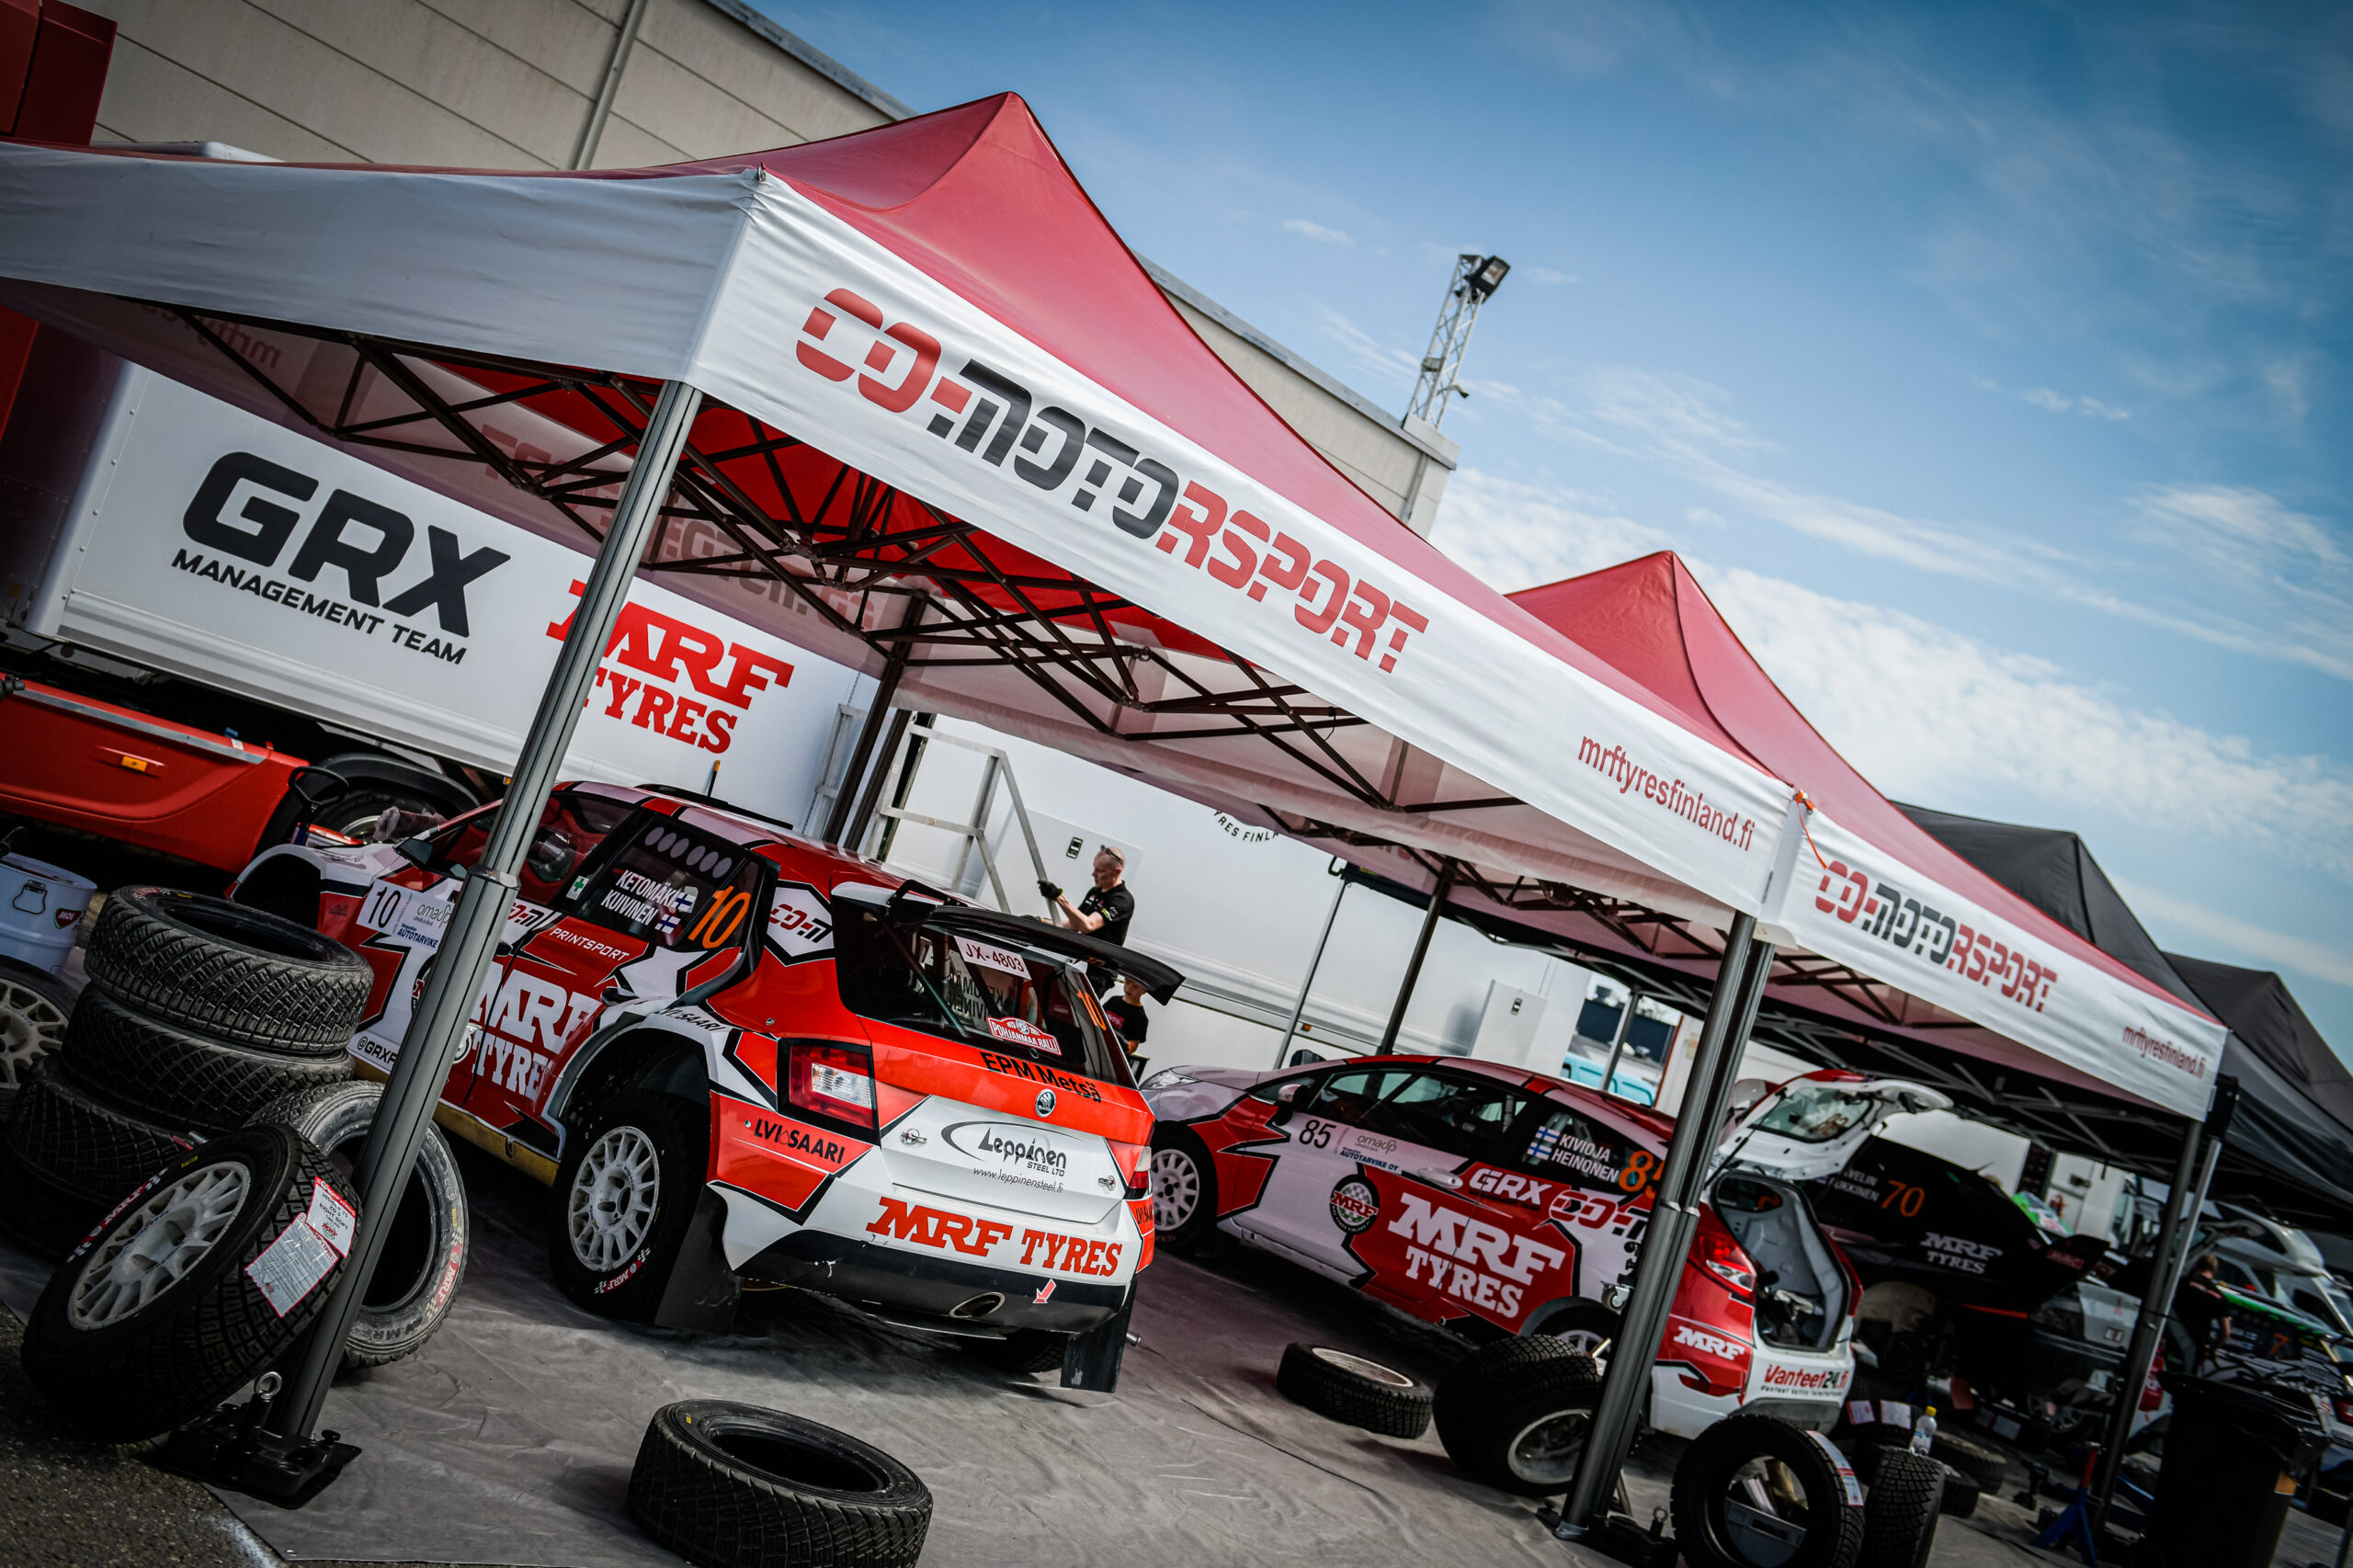 Successful first year at MRF Tyres Finland